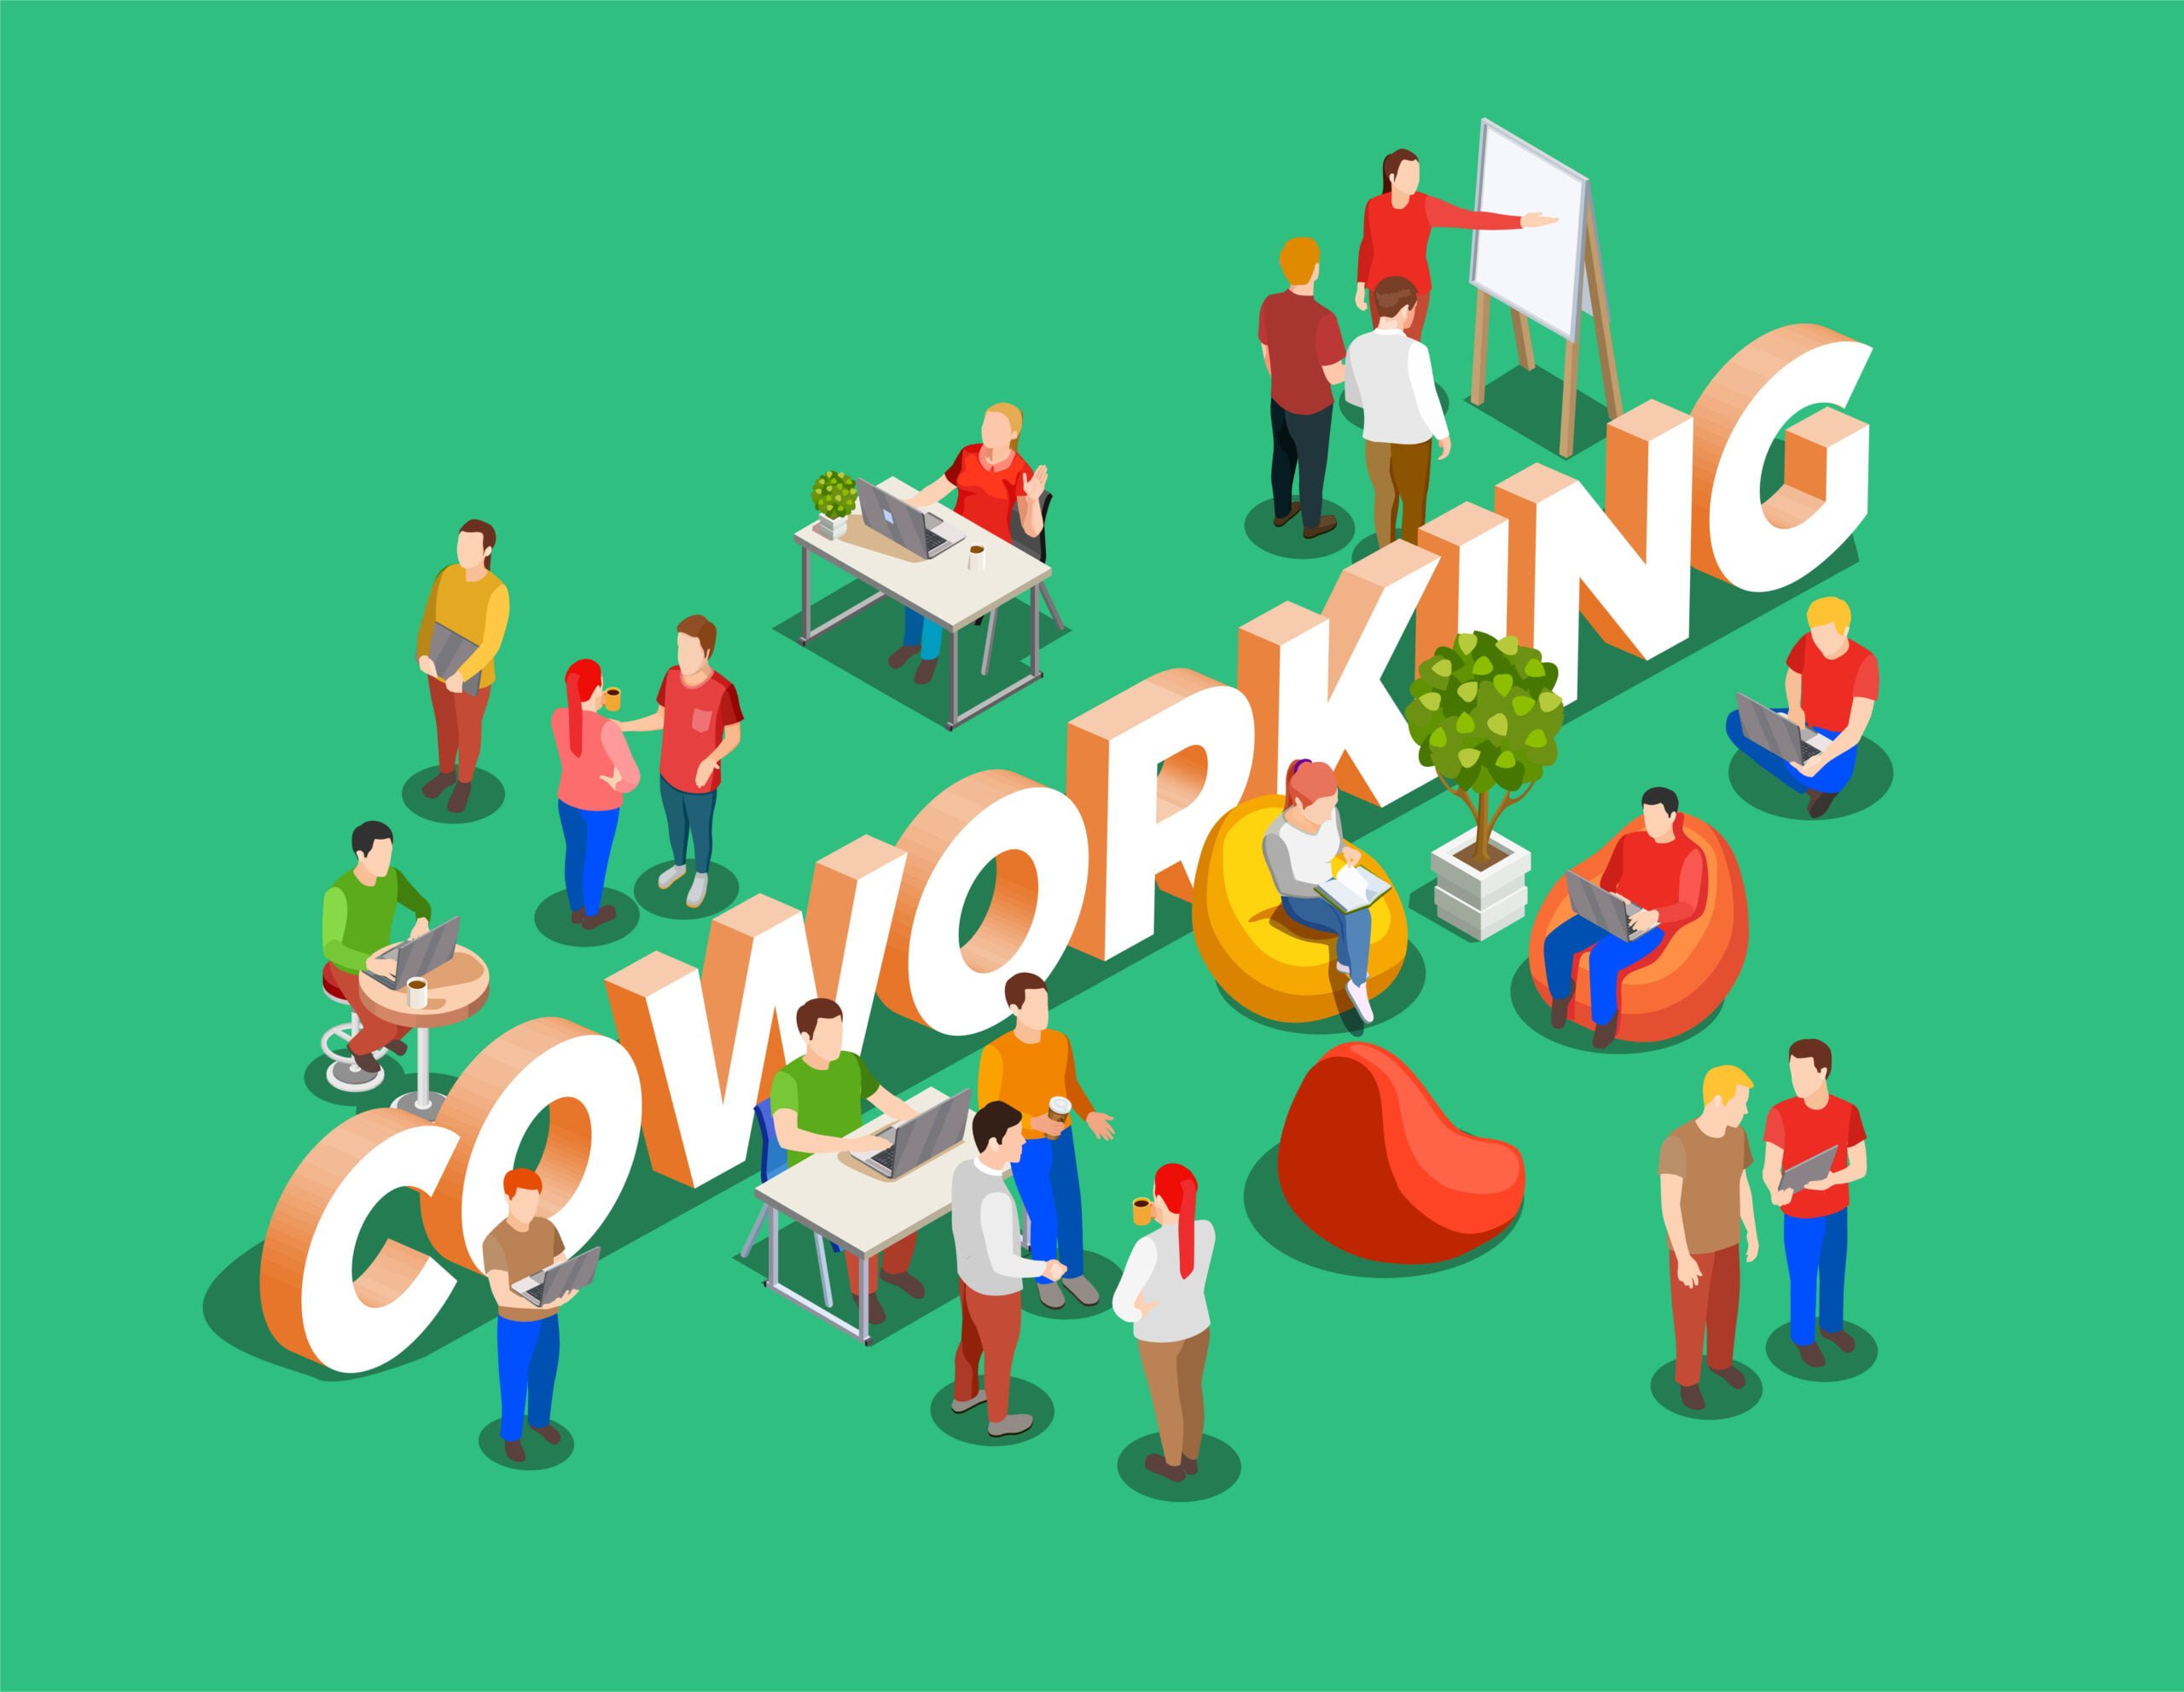 Coworking people isometric composition with figures of freelance worker characters and cumbersome text on green background vector illustration